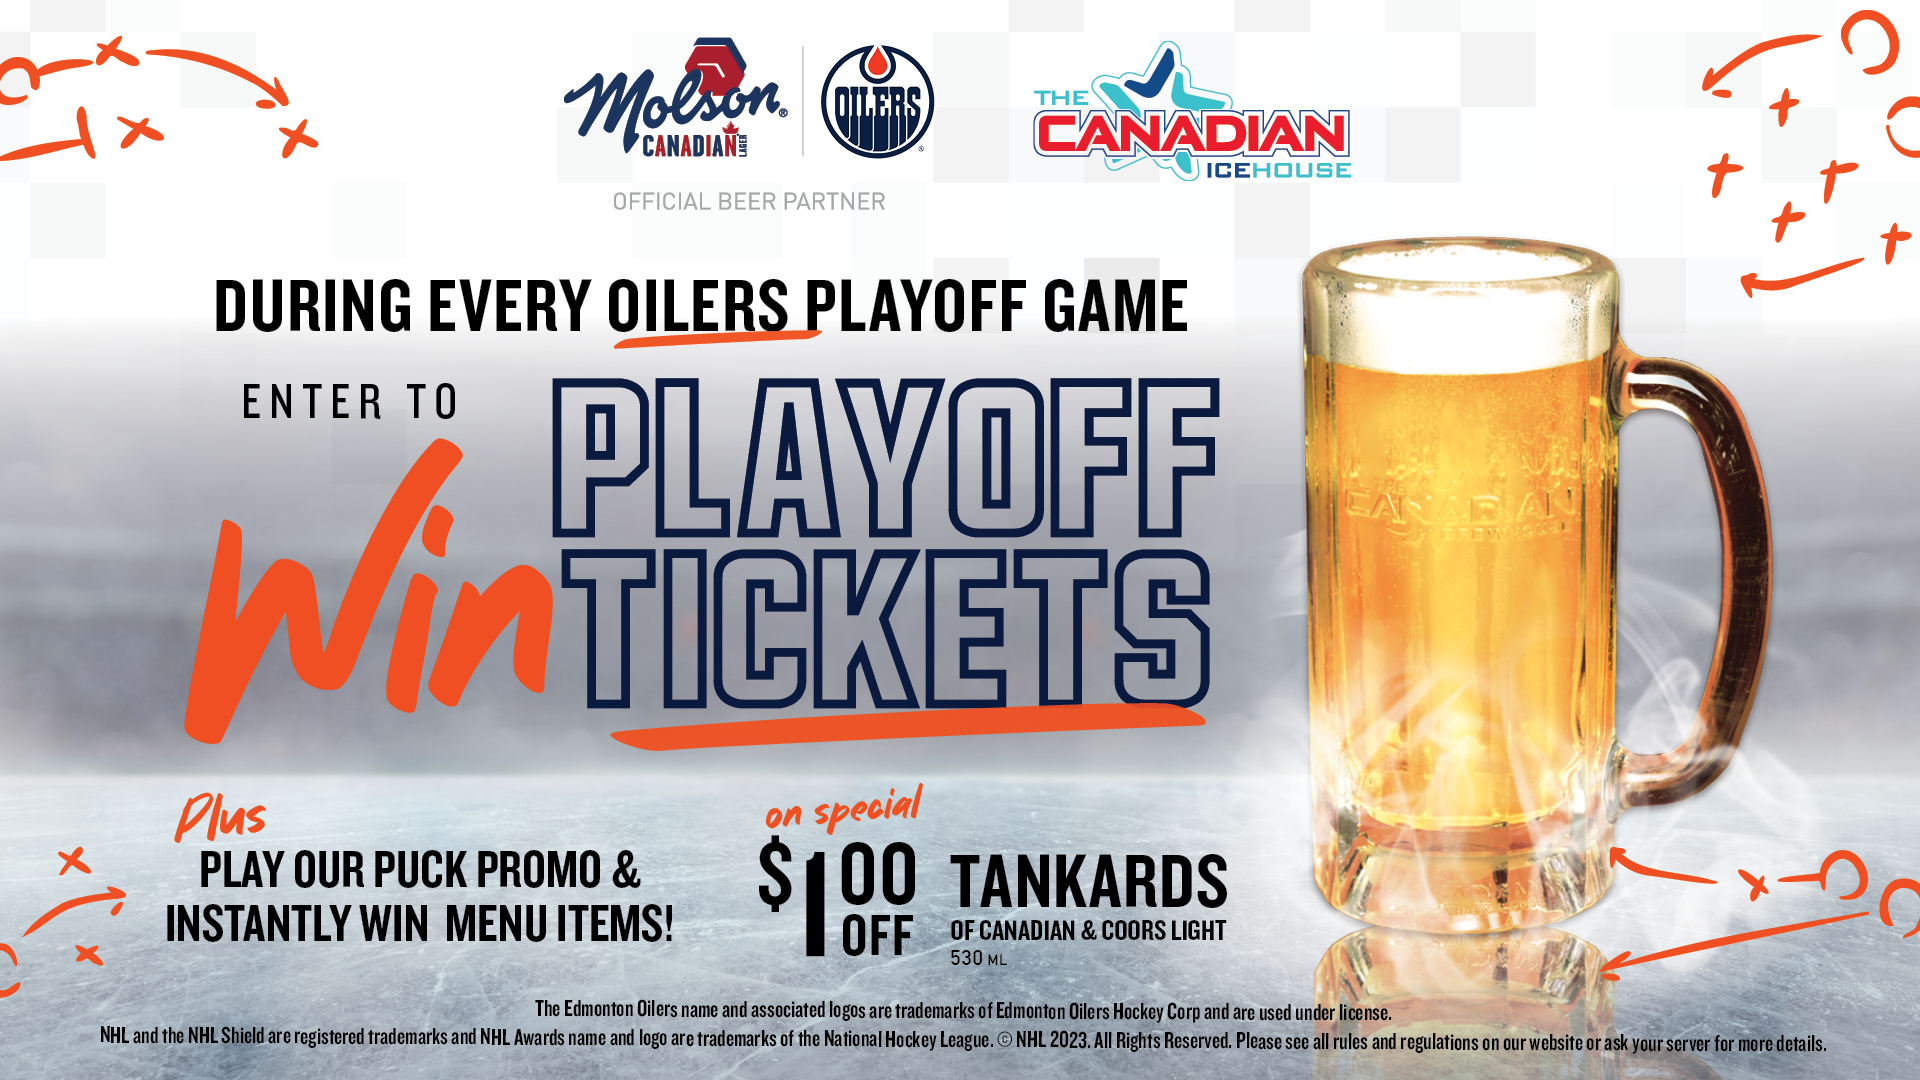 Watch the Edmonton Oilers Playoffs! The Canadian Icehouse